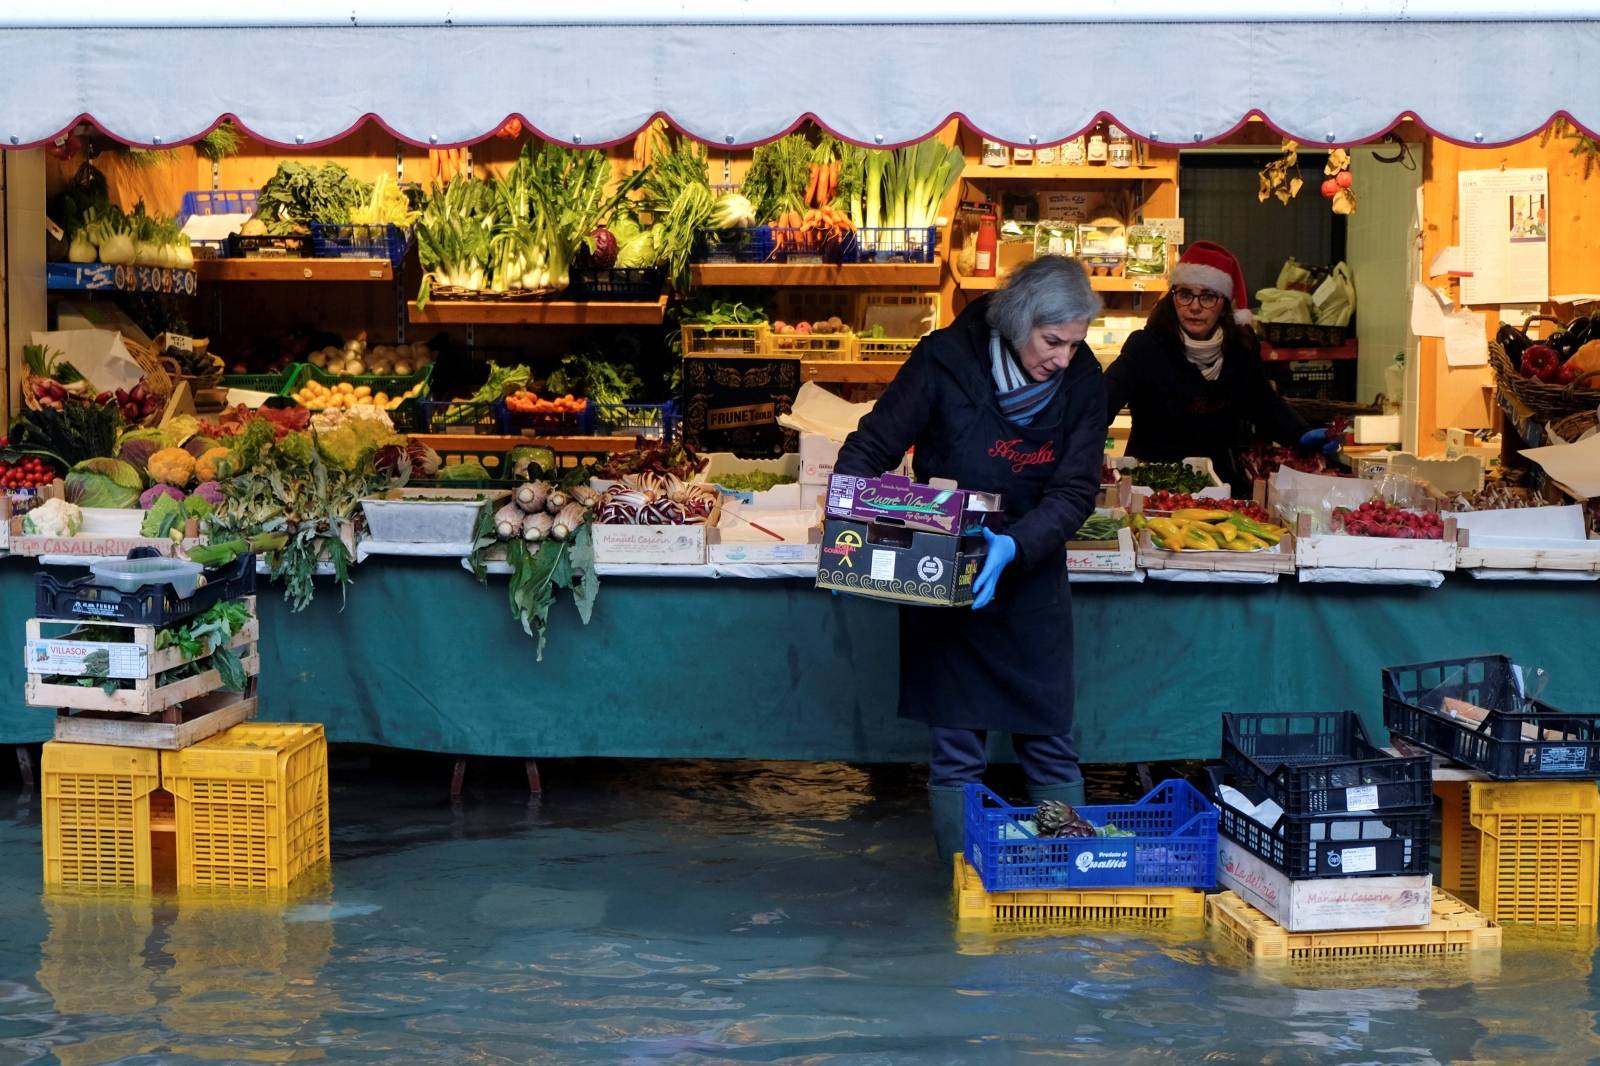 A woman carries a box in front of her vegetable stand during high tide in Venice